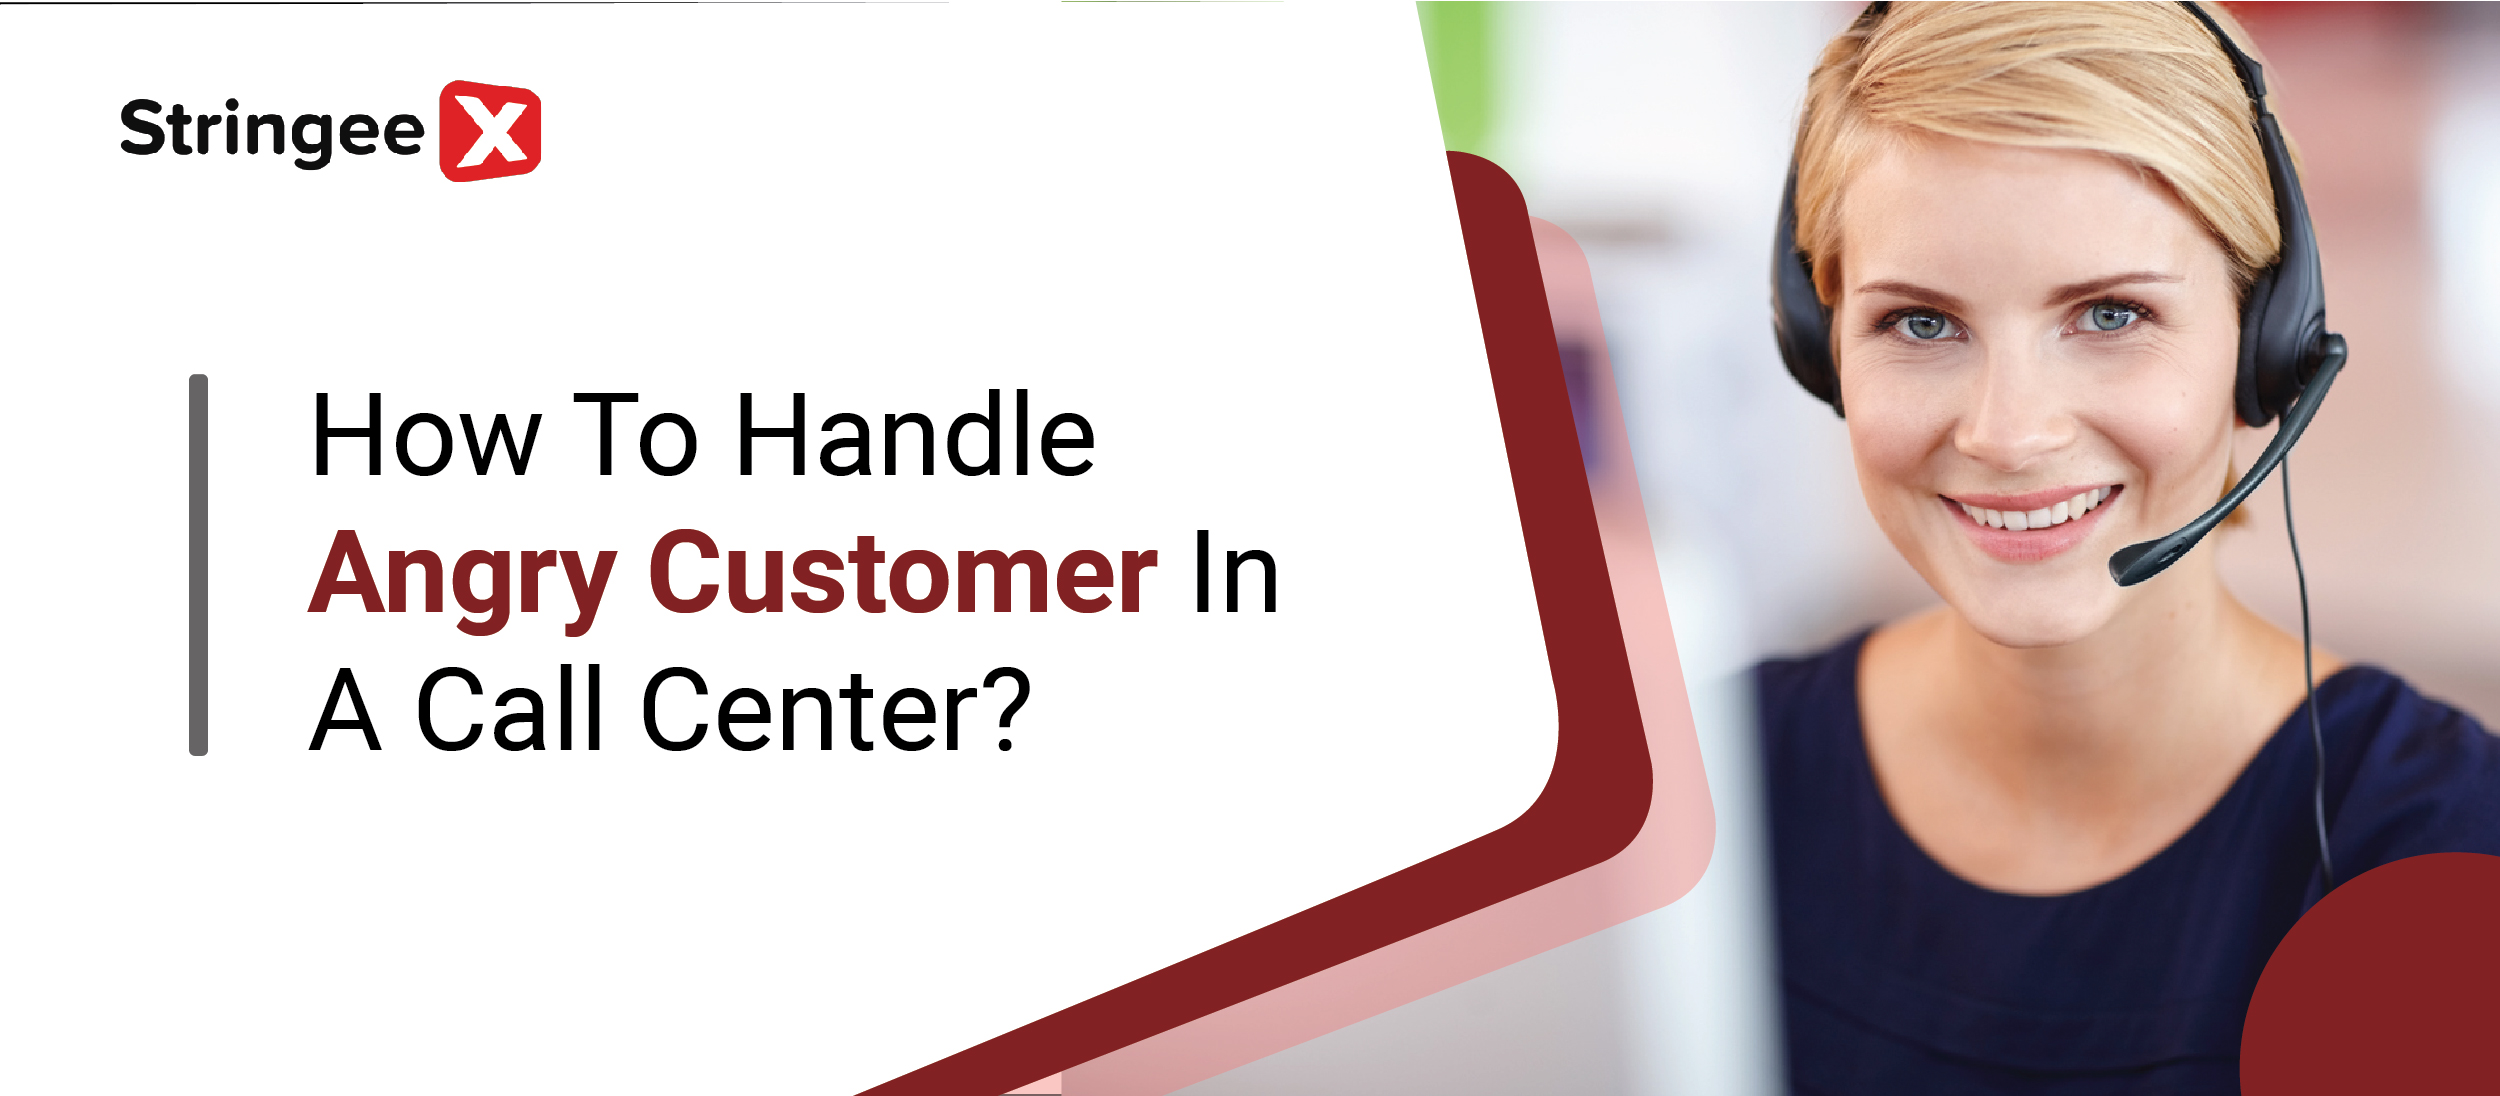 How To Handle Angry Customers In A Call Center?